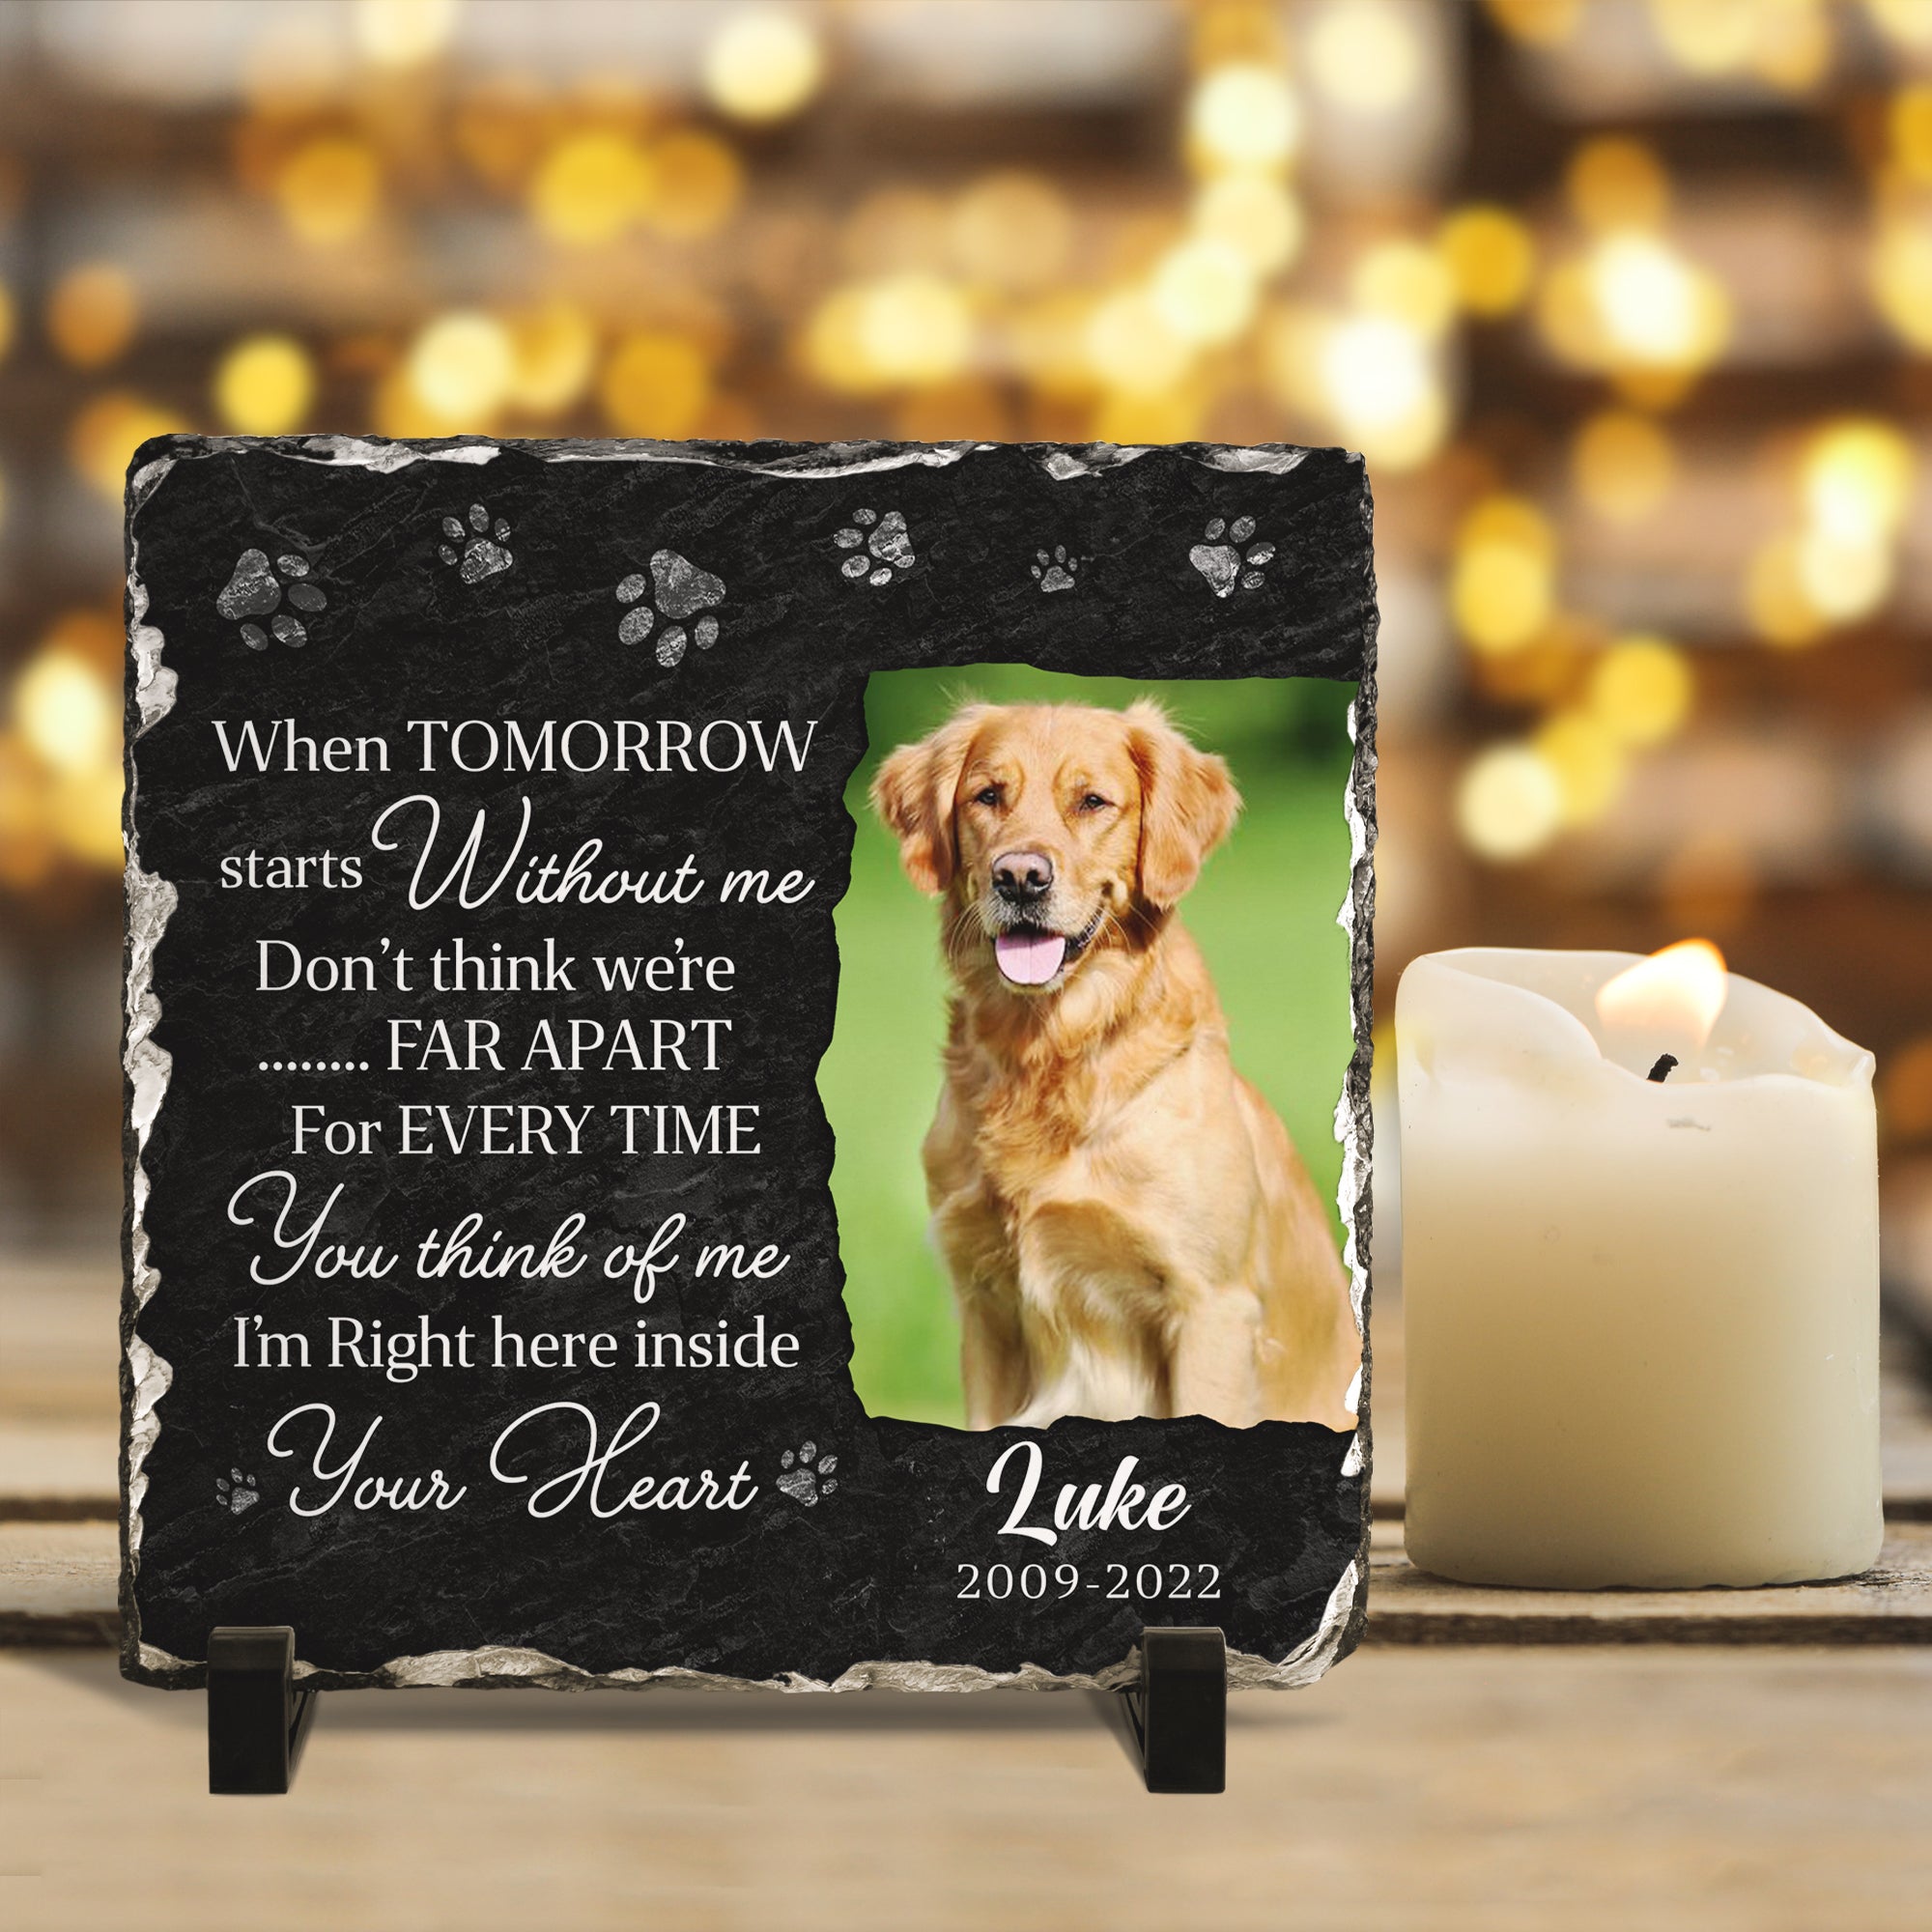 Personalizy Store Slate plaque I Am Right Here Inside Your Heart, Custom Photo, Personalized Slate Plaque, Pet Memorial Gifts